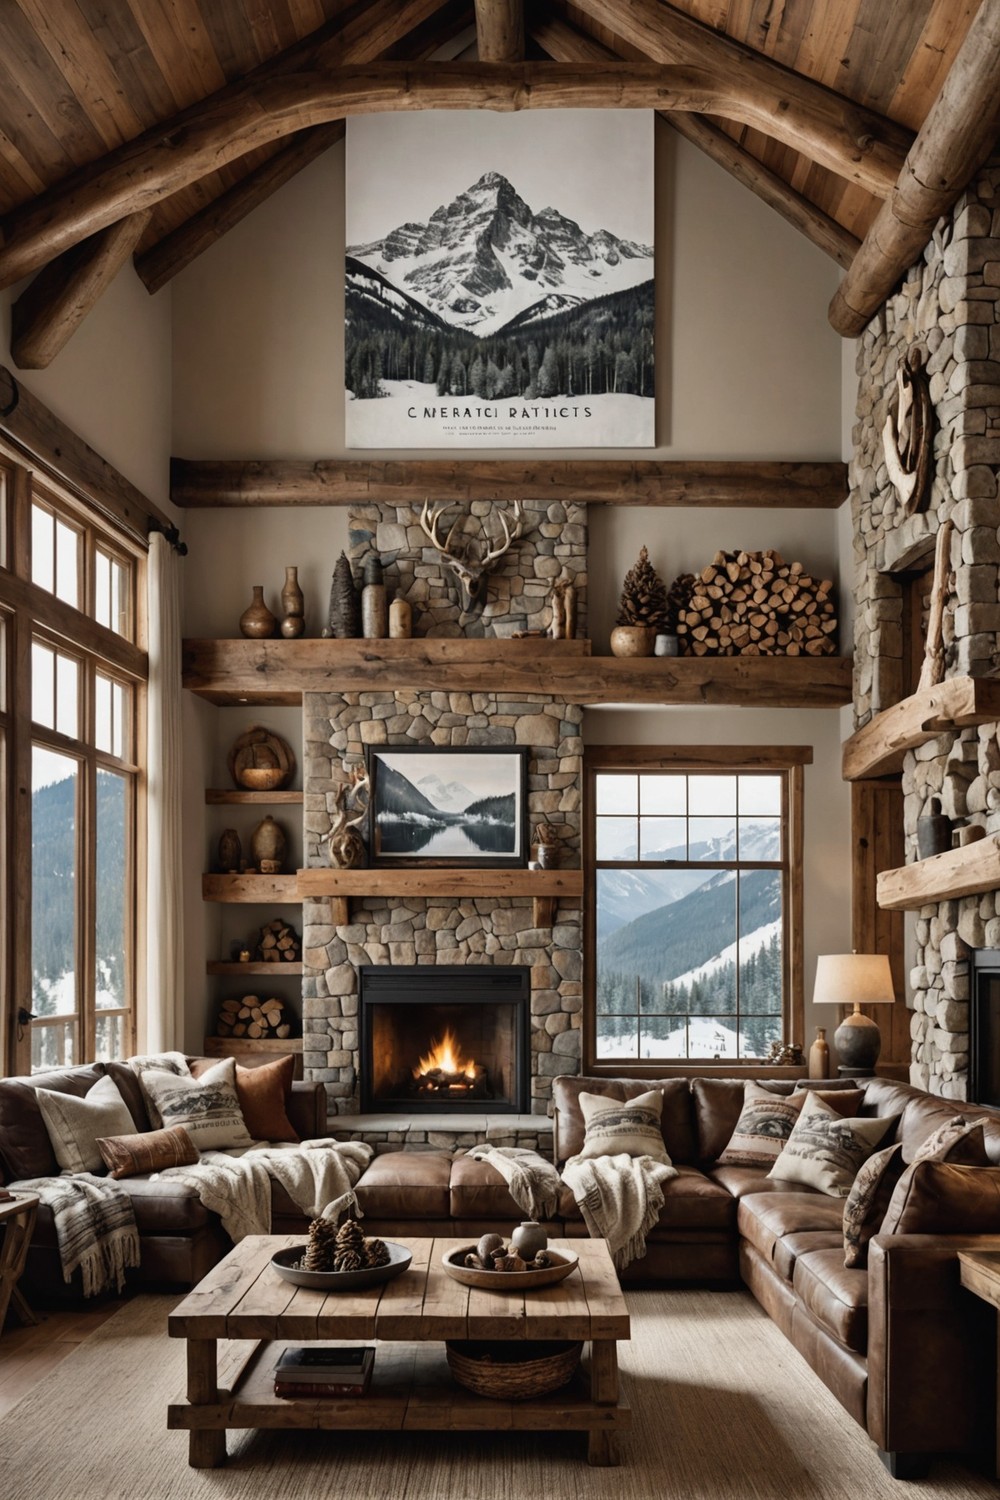 Mountain-Inspired Artwork and Accessories